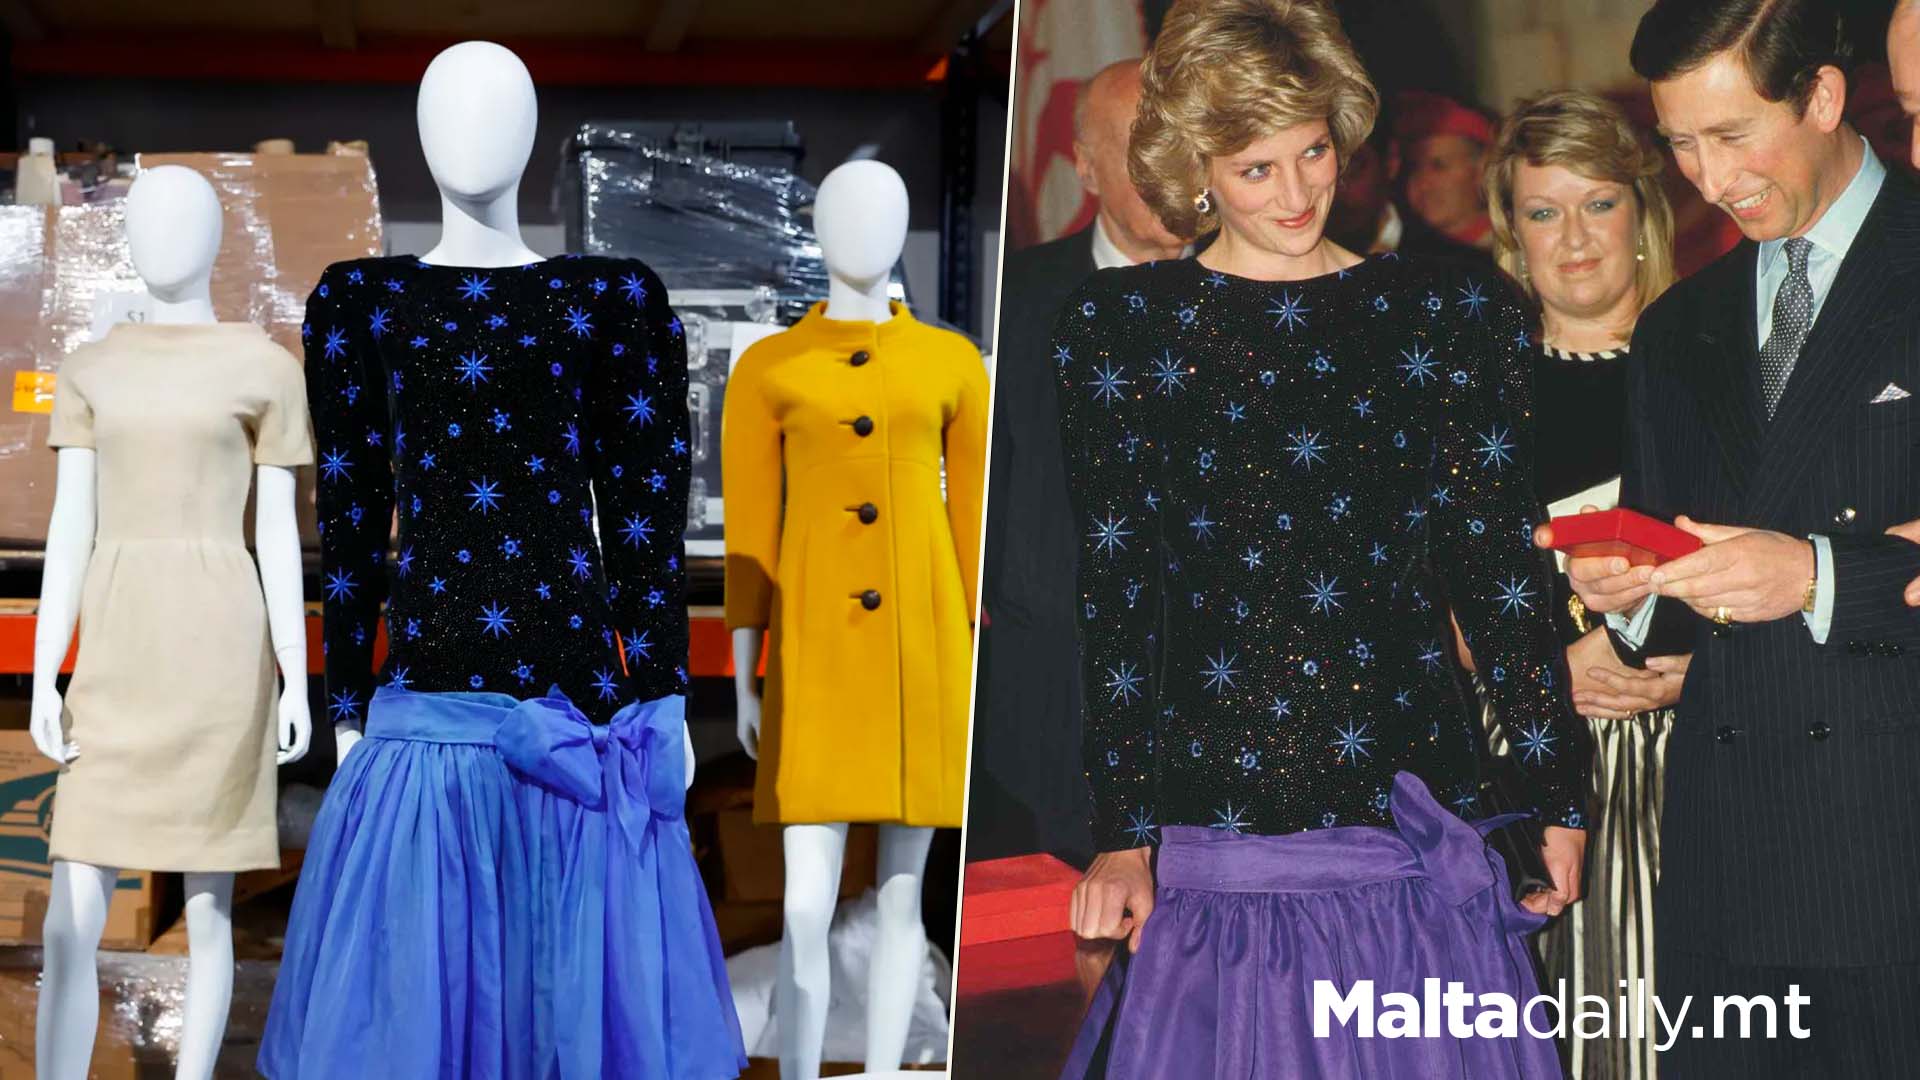 Dress Worn By Princess Diana Sells For Record £900,000